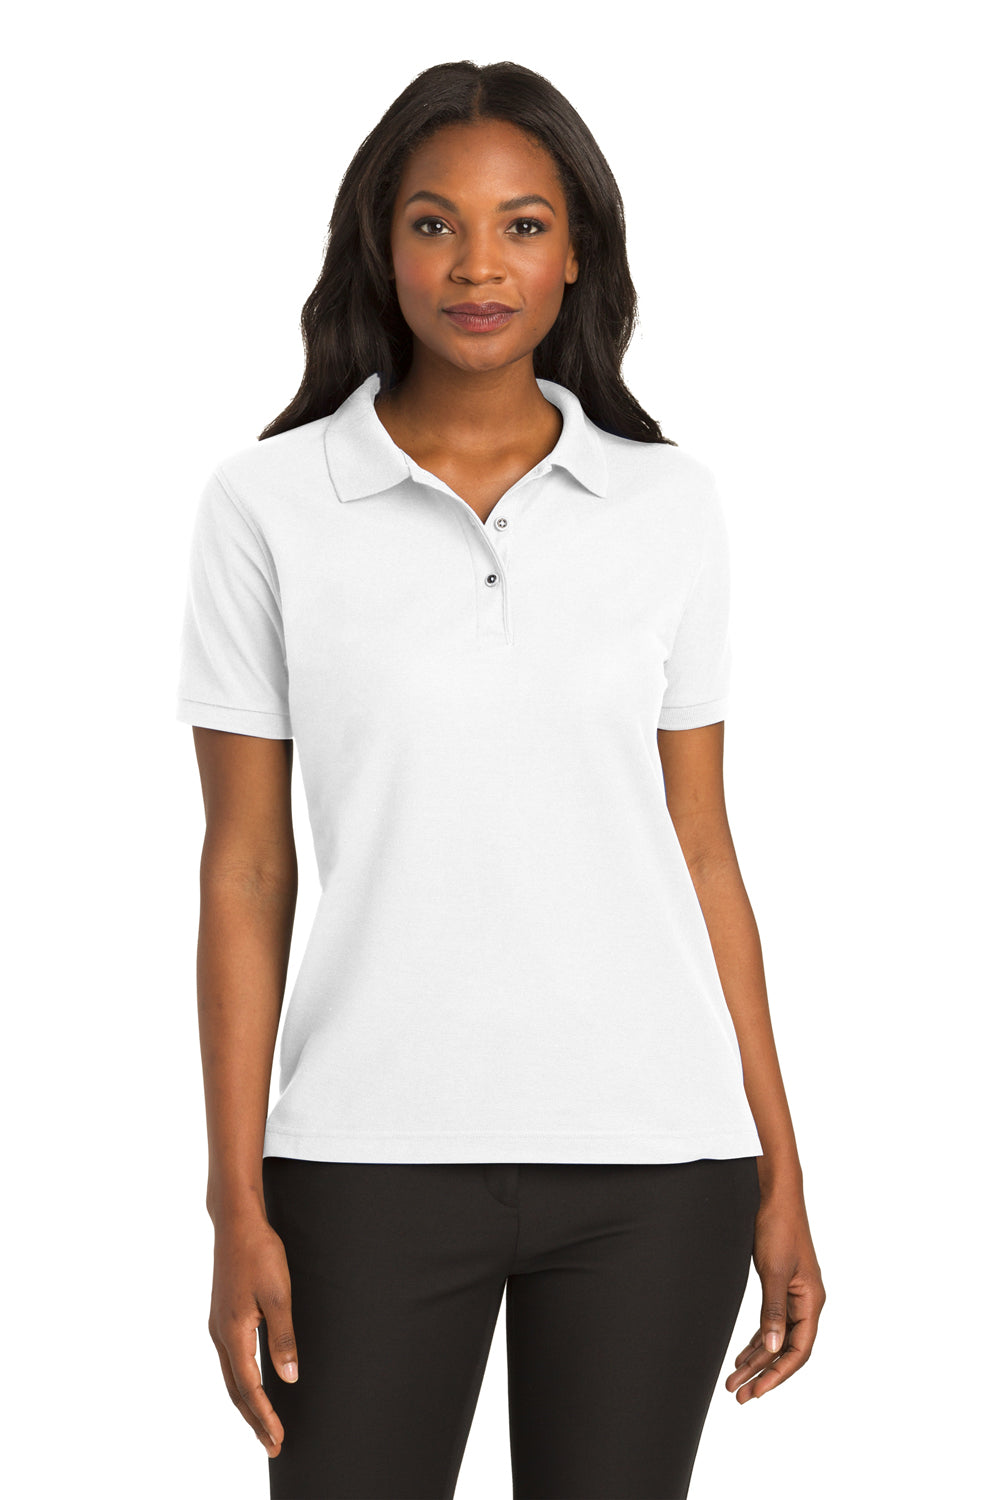 Port Authority L500 Womens Silk Touch Wrinkle Resistant Short Sleeve Polo Shirt White Front